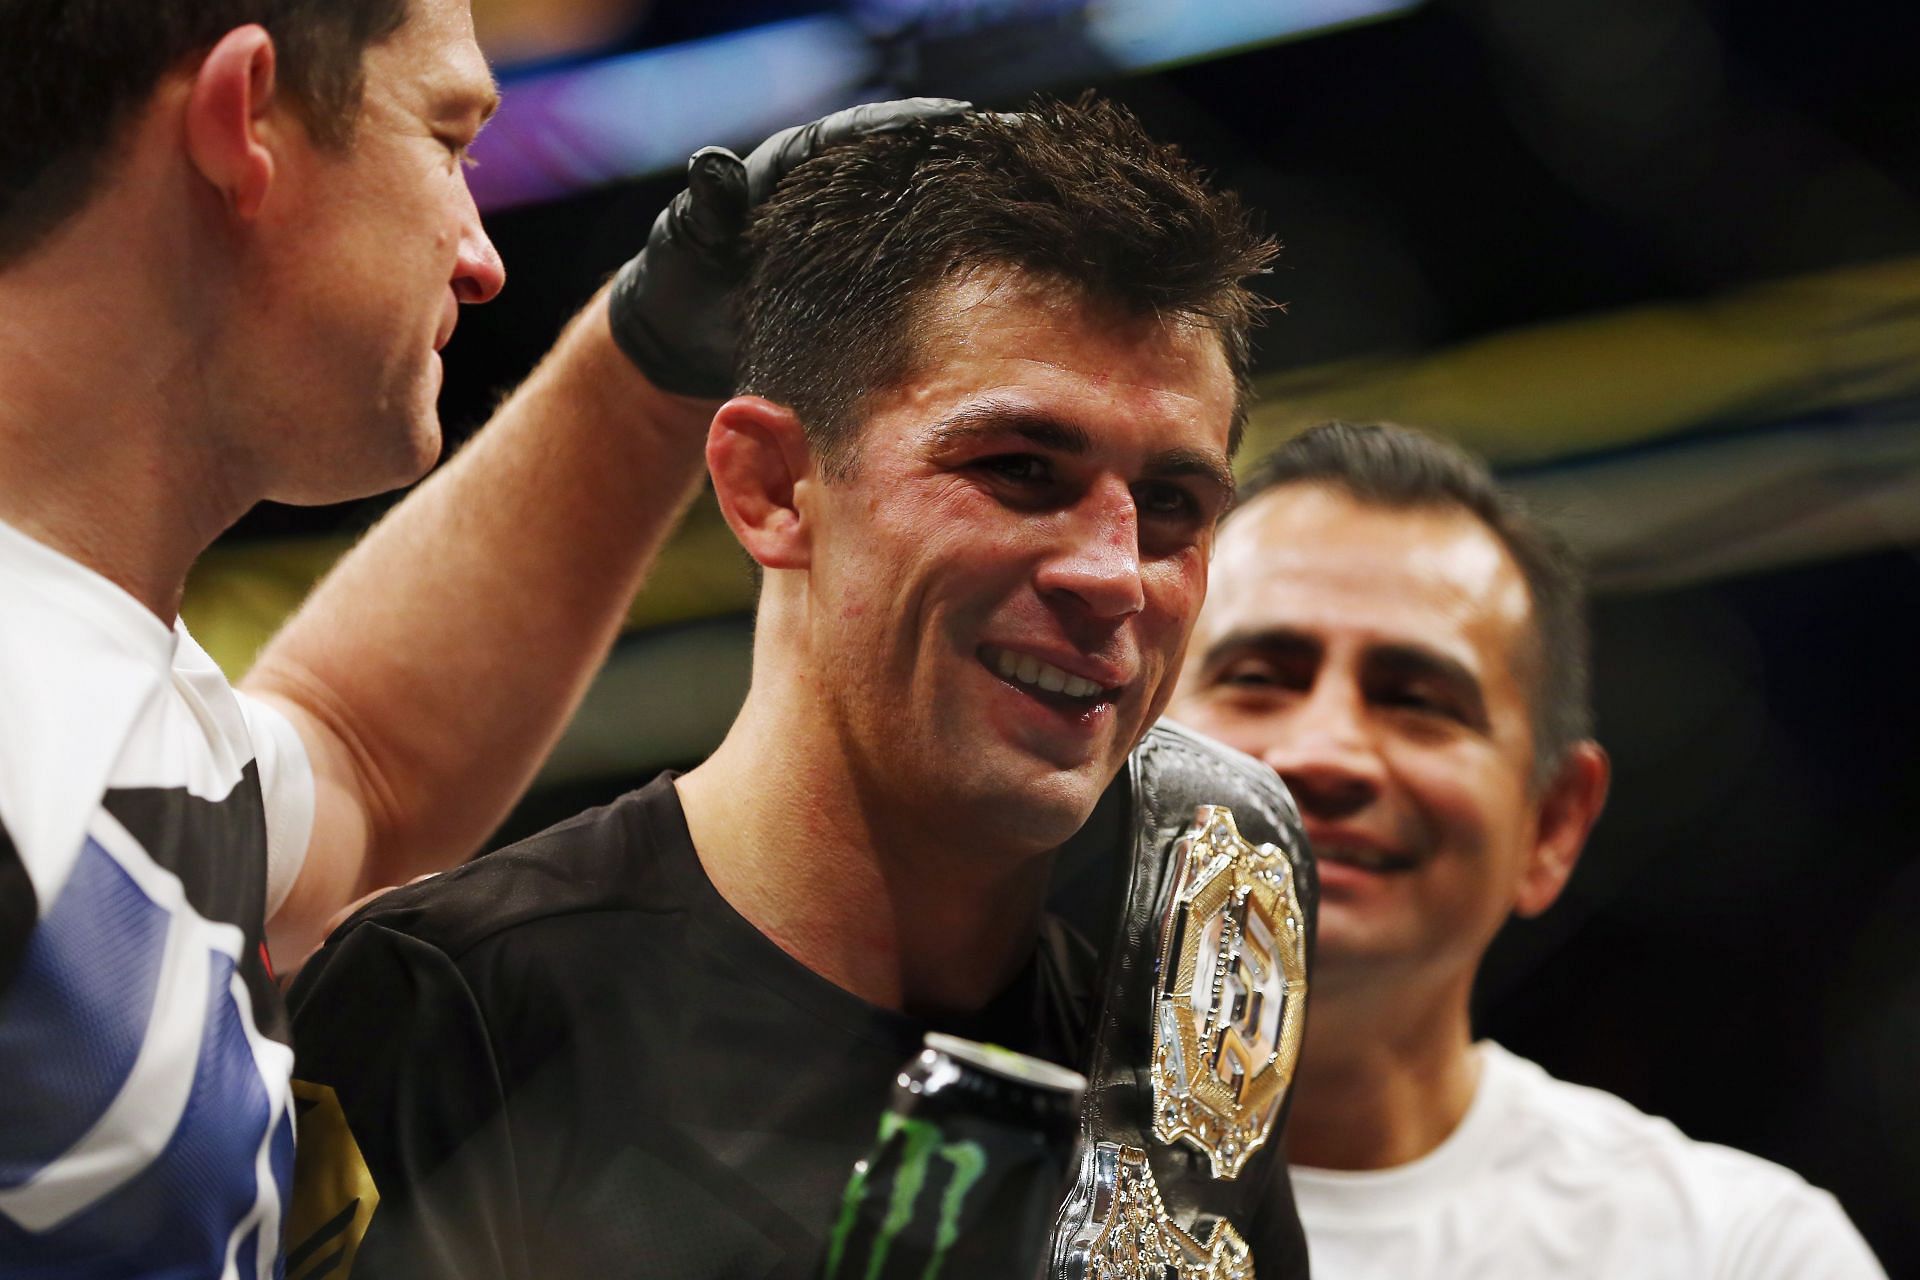 Without injuries, Dominick Cruz&#039;s spot as bantamweight GOAT would probably be undeniable